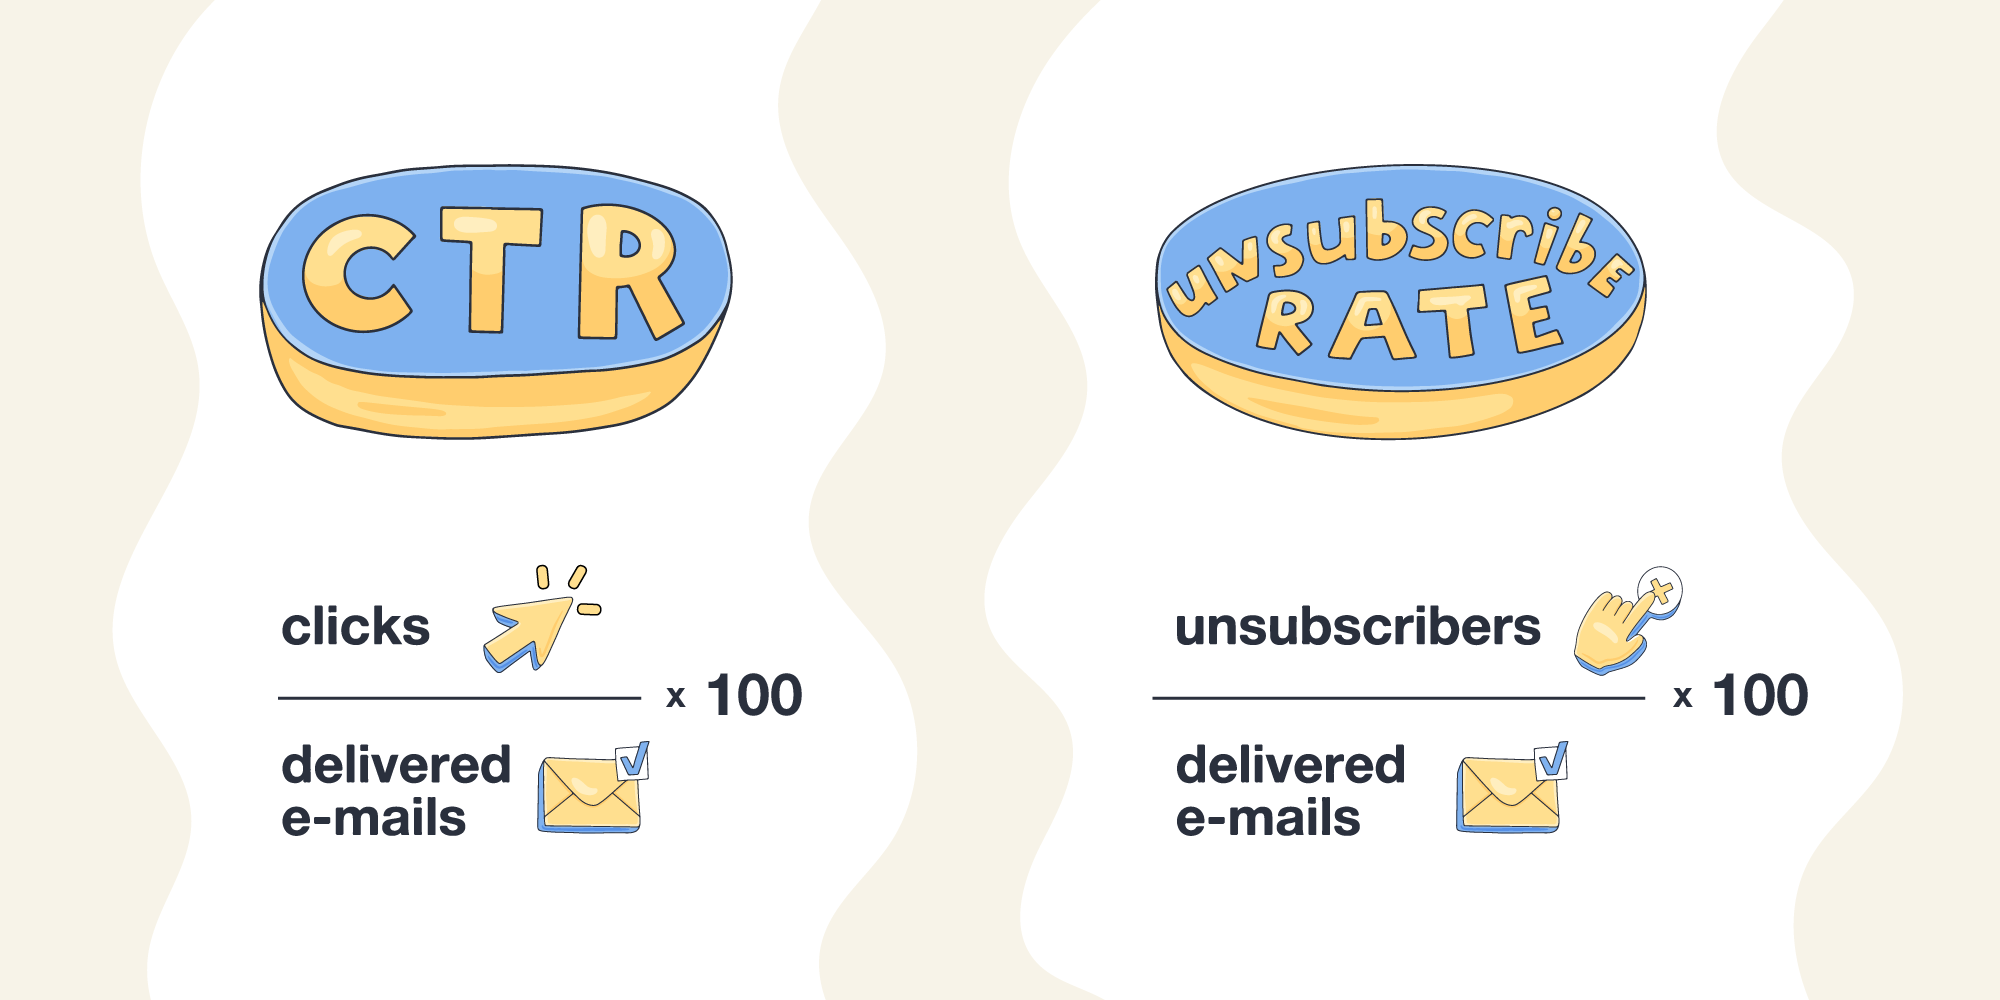 CTR and Unsubscribe rate calculations